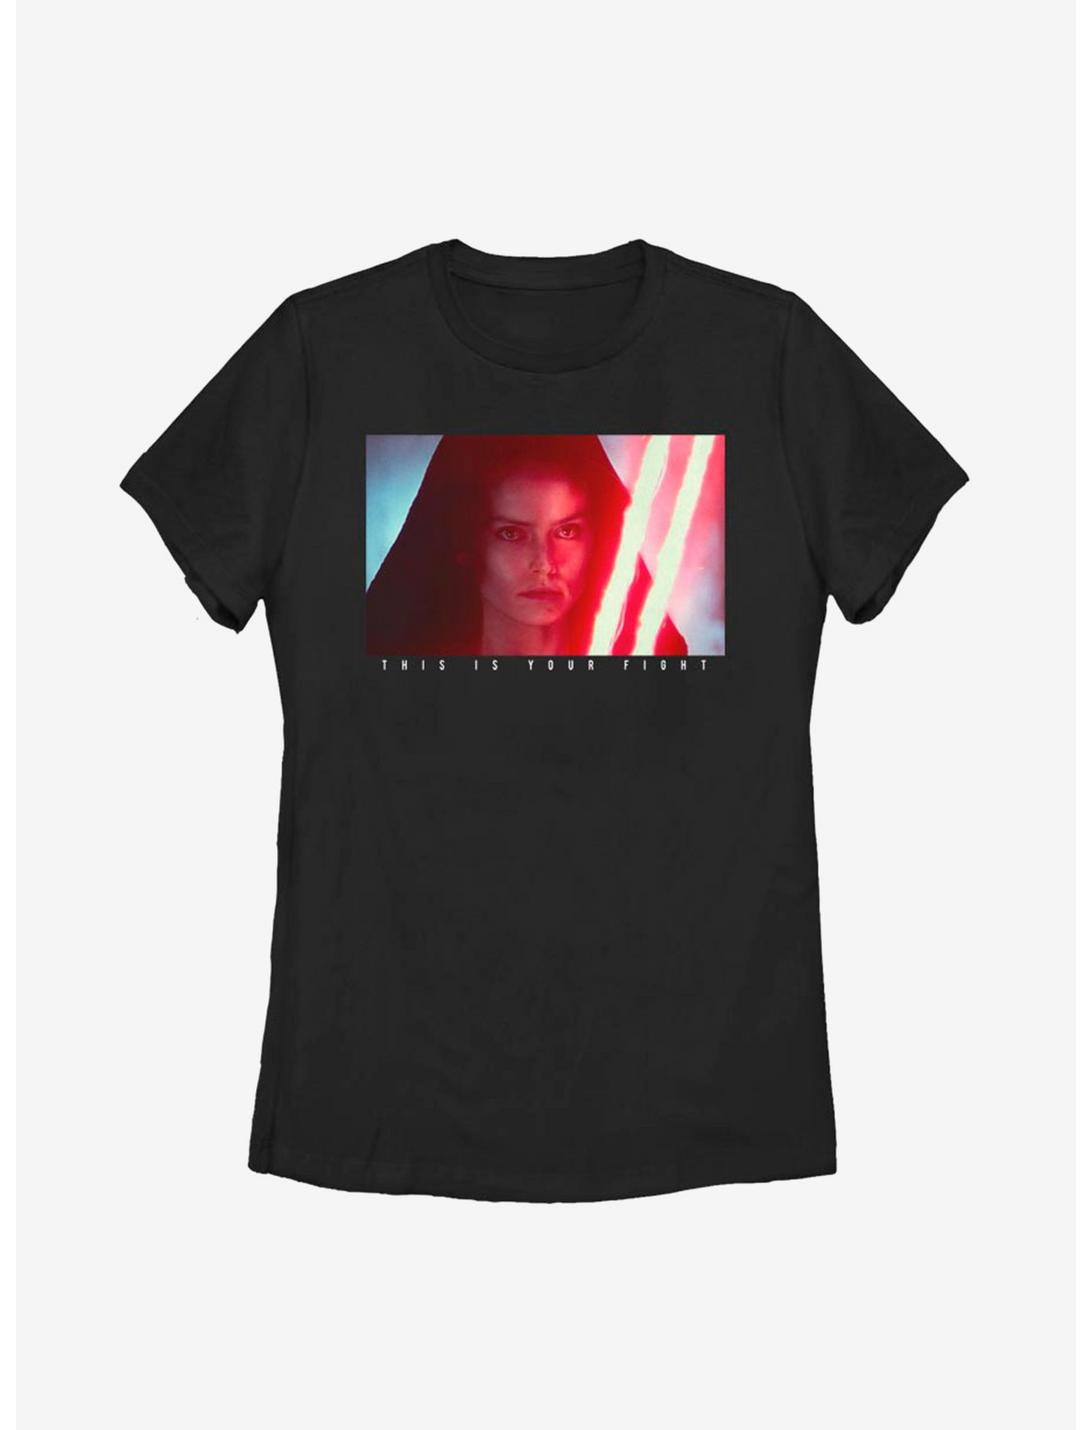 Star Wars Episode IX The Rise Of Skywalker Your Fight Womens T-Shirt, BLACK, hi-res